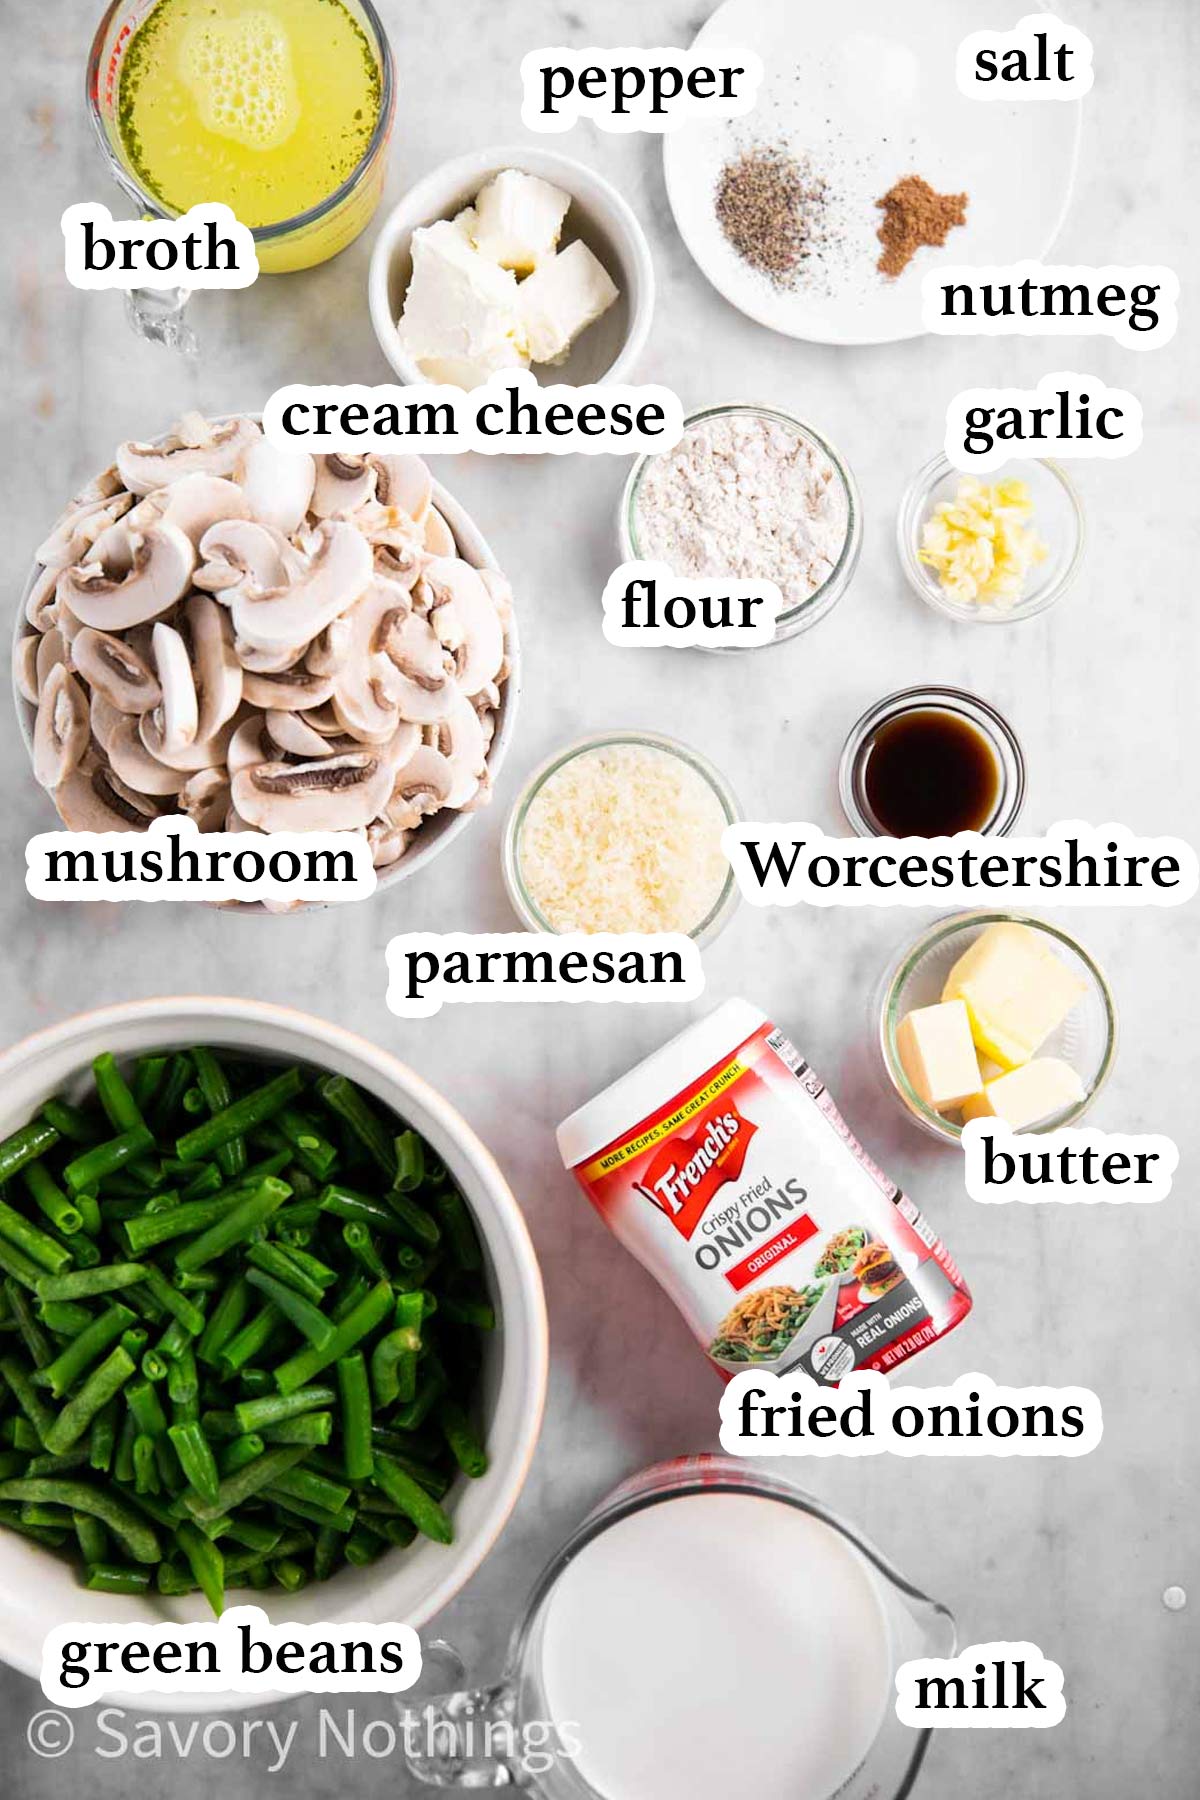 ingredients for green bean casserole with text labels